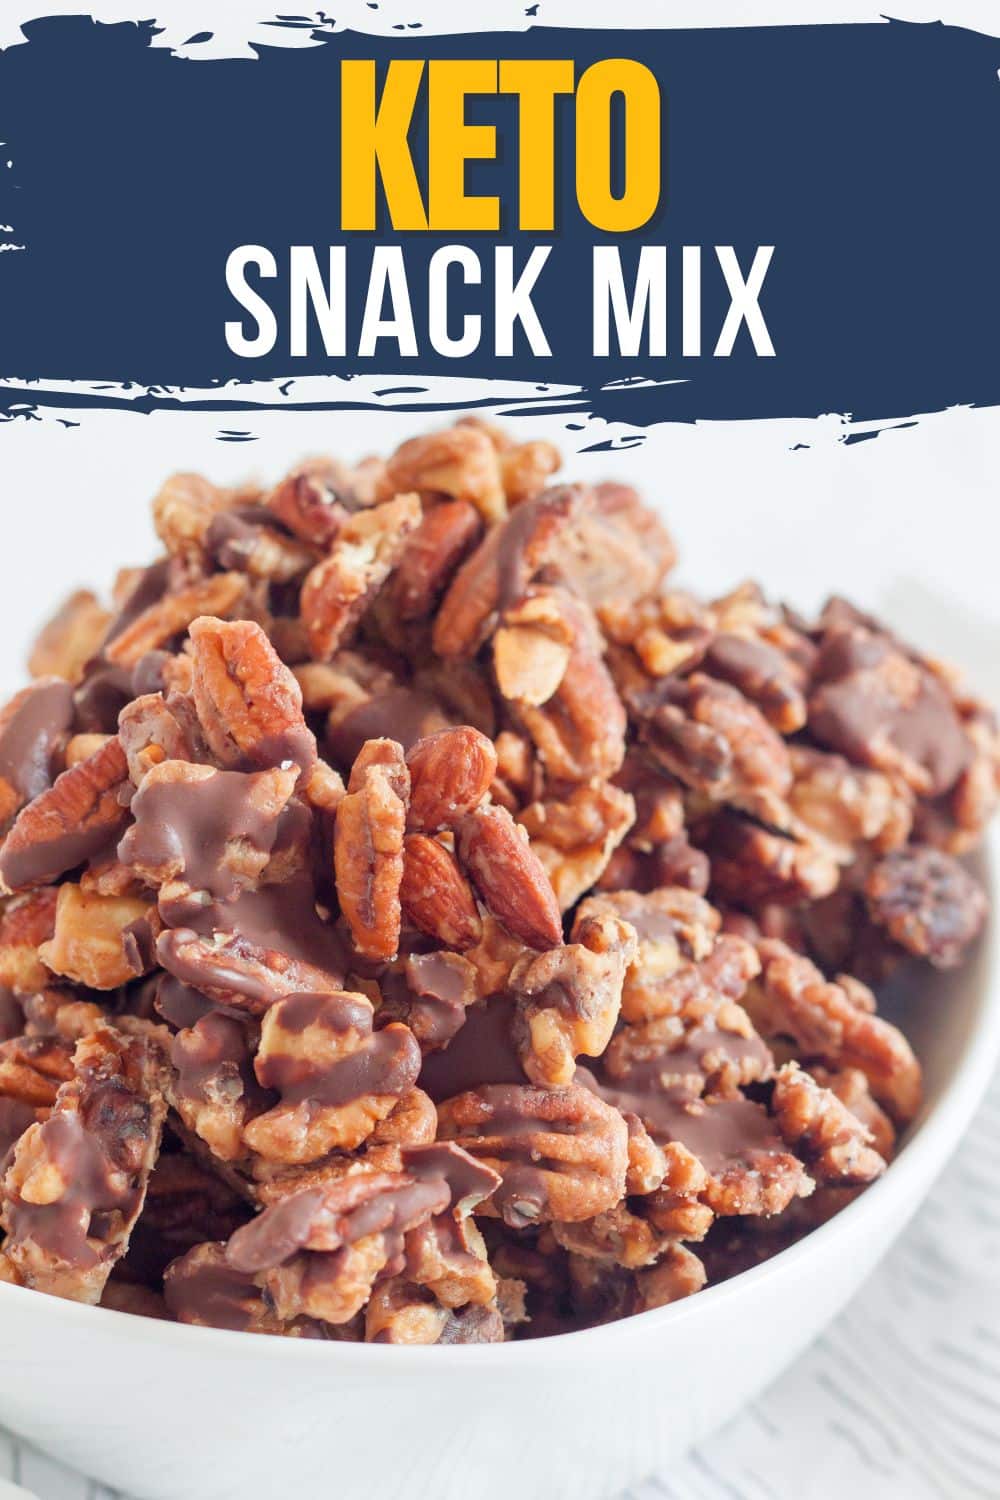 Image of Keto Snack Mix served in a white bowl. Blue banner with yellow and white letters.